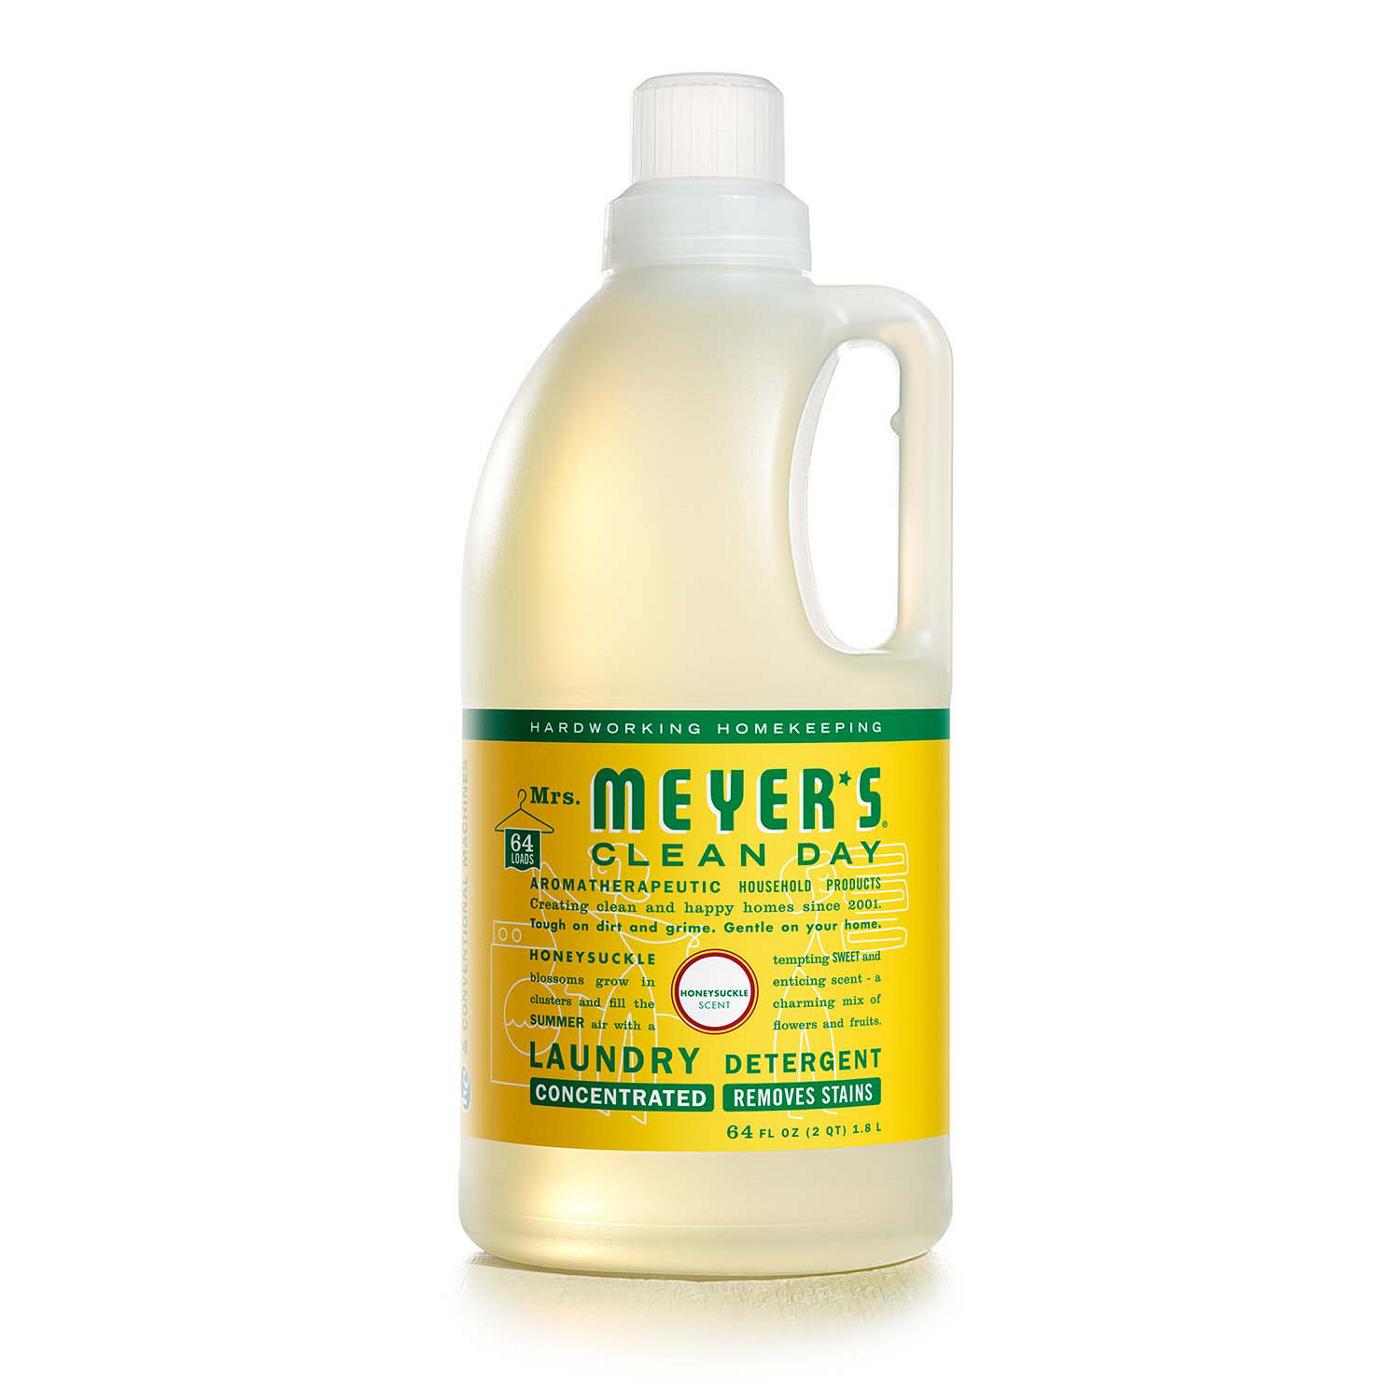 Mrs. Meyer's Clean Day Honeysuckle Scent Concentrated Laundry Detergent, 64 Loads; image 1 of 4